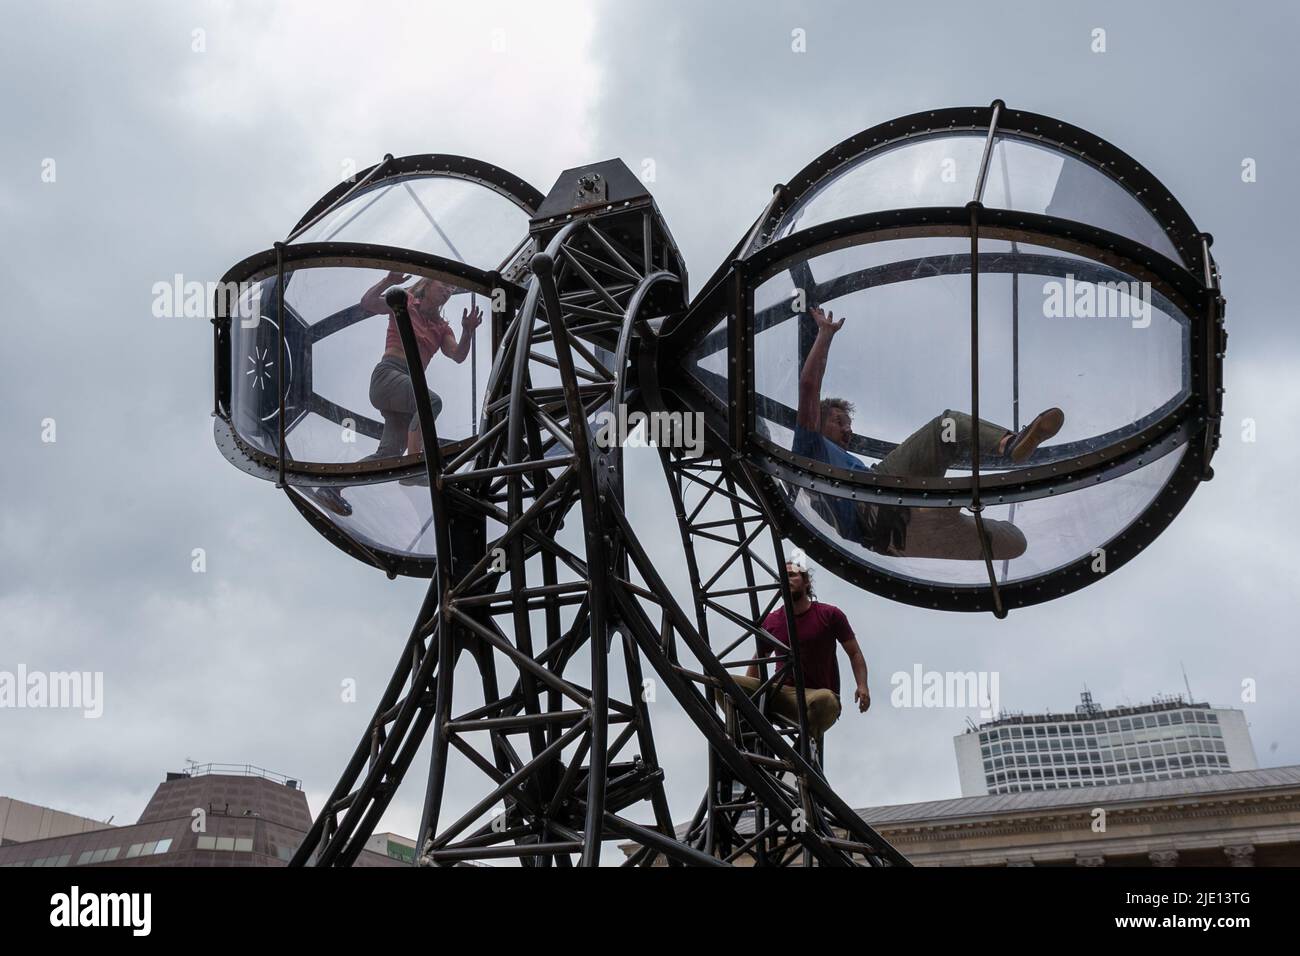 Birmingham, UK. 24th June, 2022. Performers use their unique and dynamic style of dance in a 7m long egg timer, as part of Timeless by Joli Vyan. The performance is part of Birmingham International Dance Festival which takes place in Birmingham city centre. Credit: Peter Lopeman/Alamy Live News Stock Photo